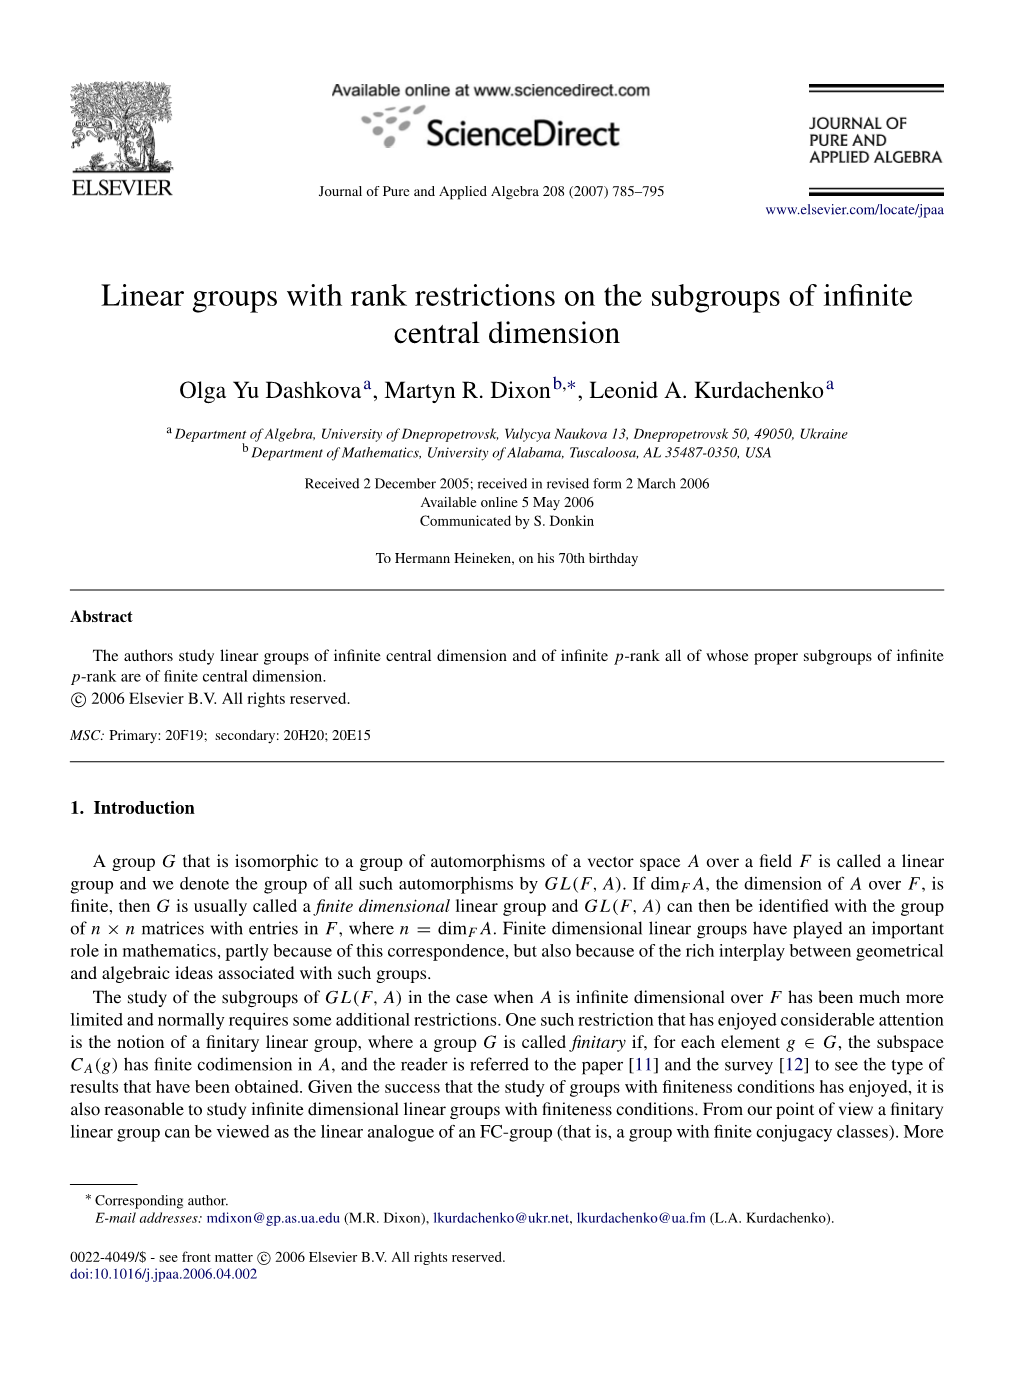 Linear Groups with Rank Restrictions on the Subgroups of Infinite Central